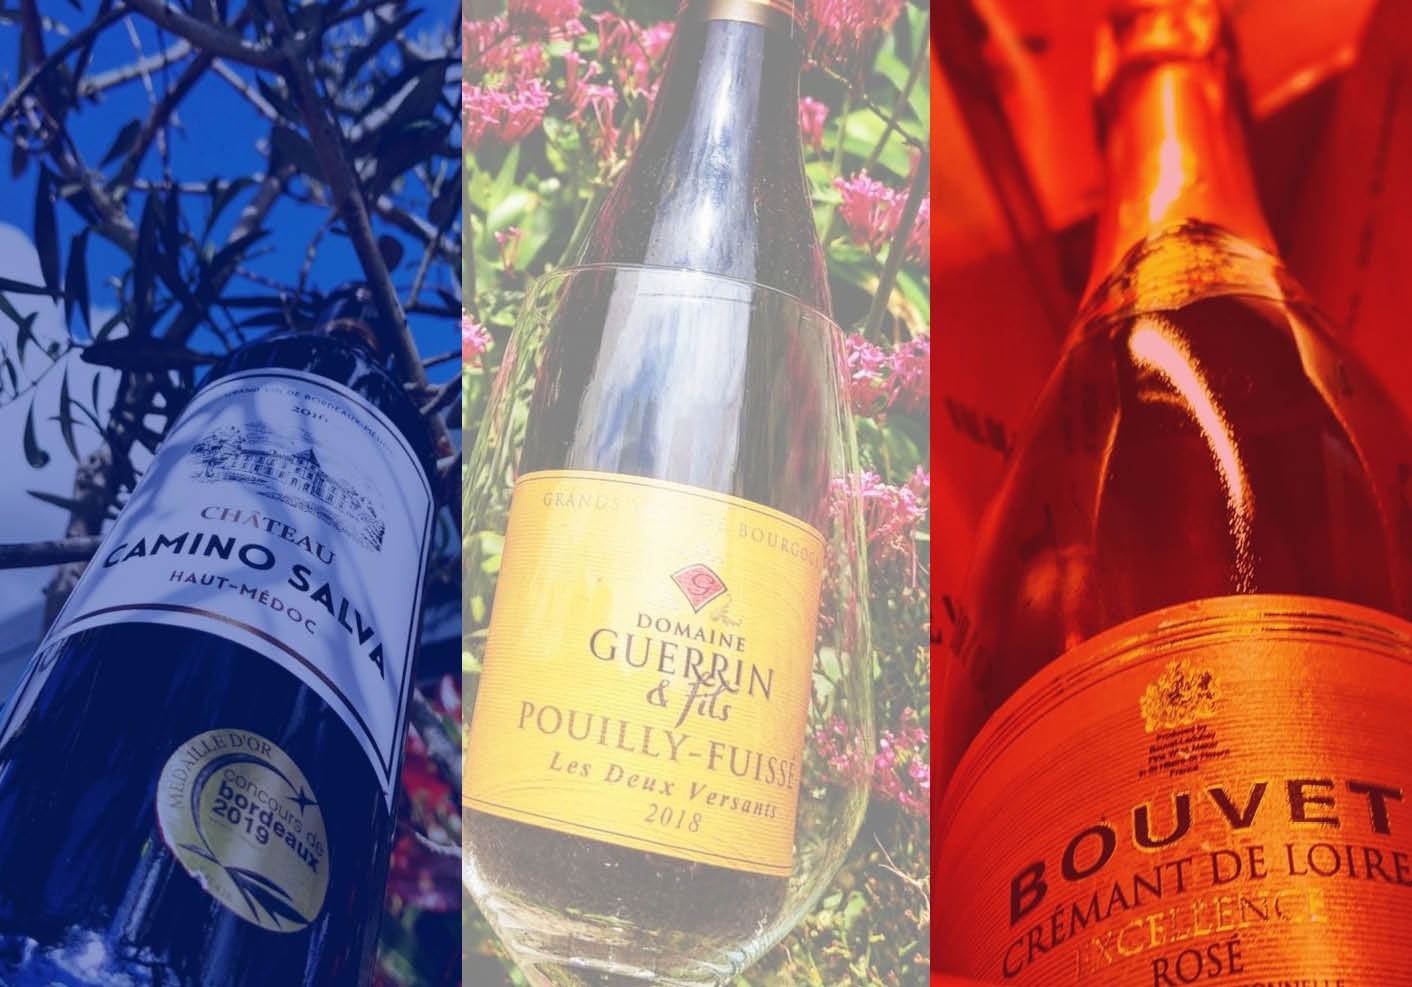 Bastille day celebrations – so many great wines to choose from!